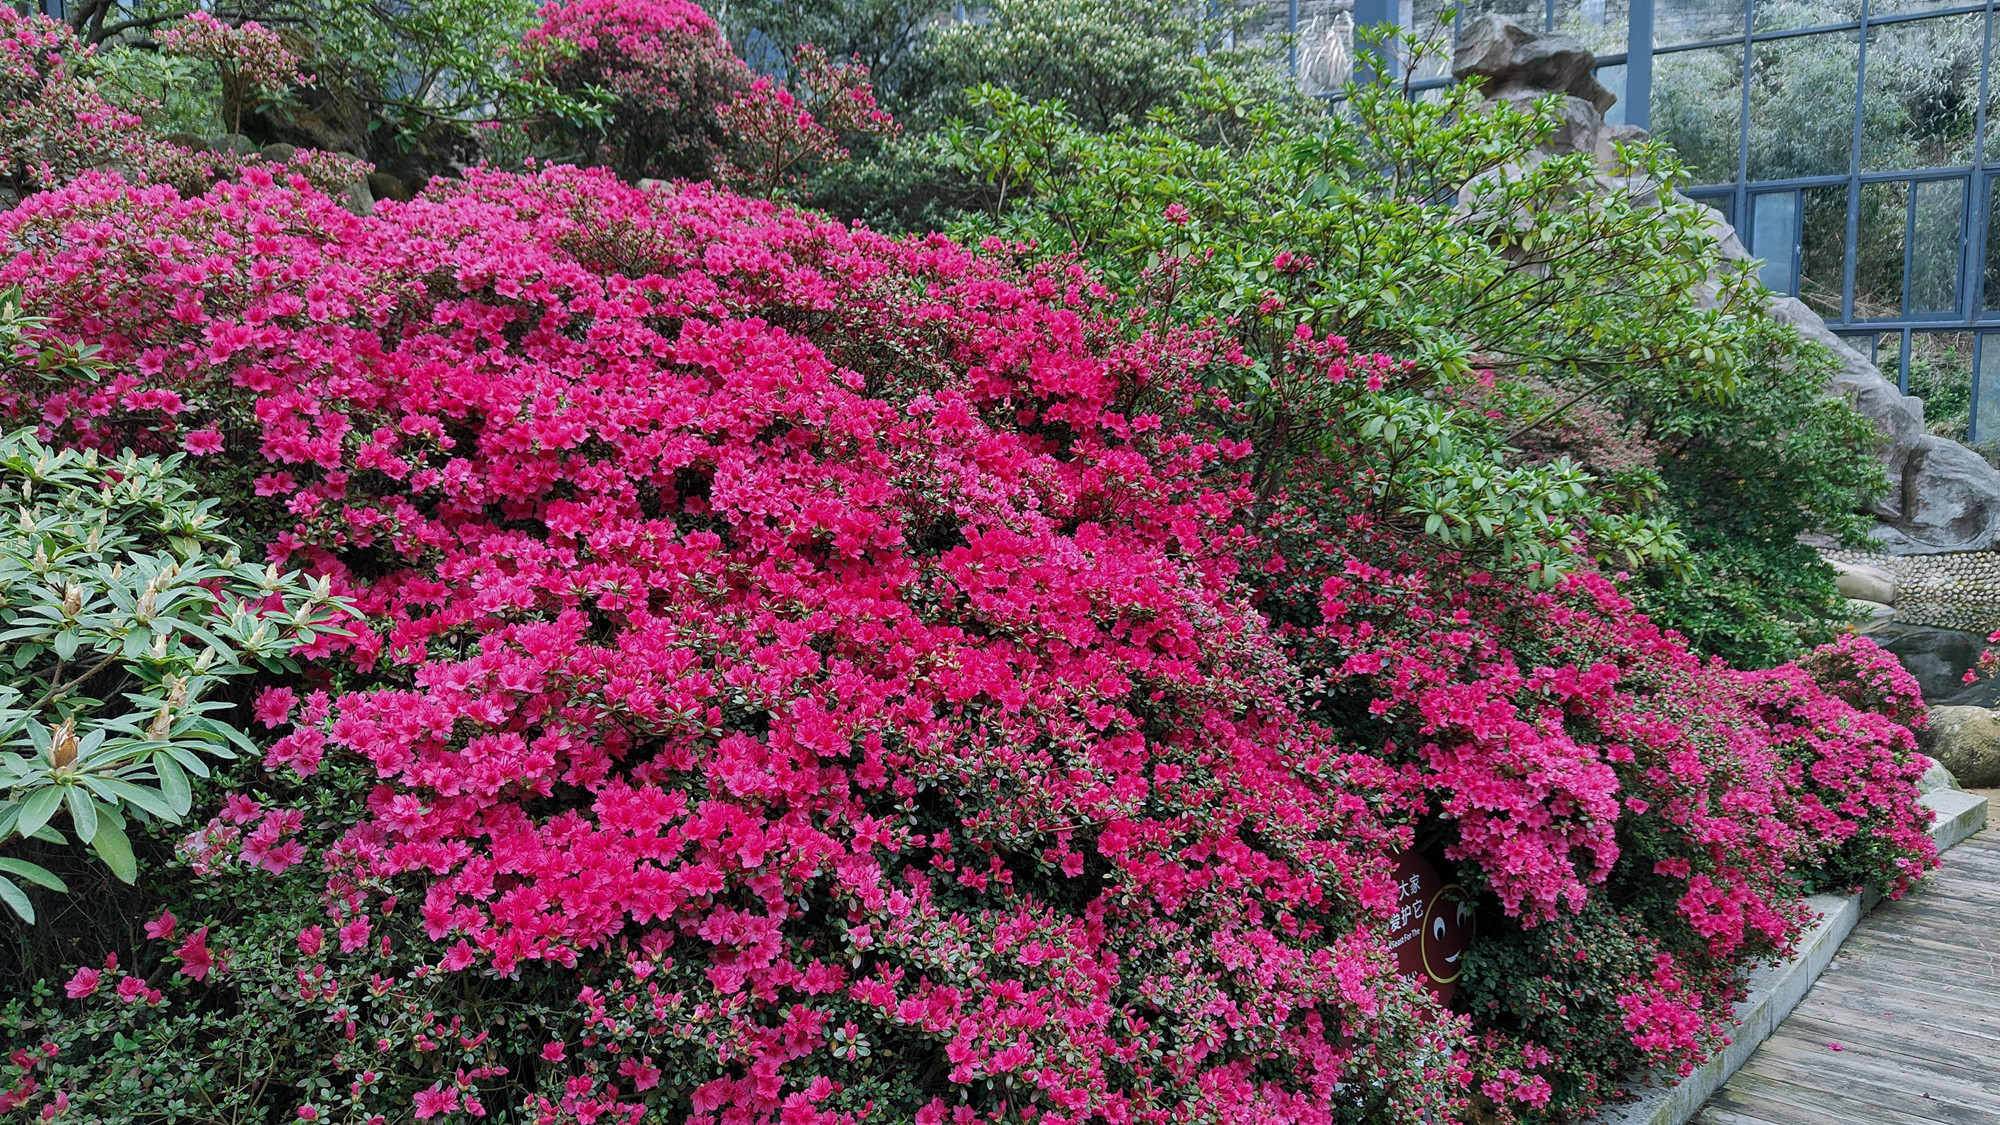 The azaleas bloom, beautiful as a fairyland! Come and check in at the Dujuan Expo Park in Guifeng Mo